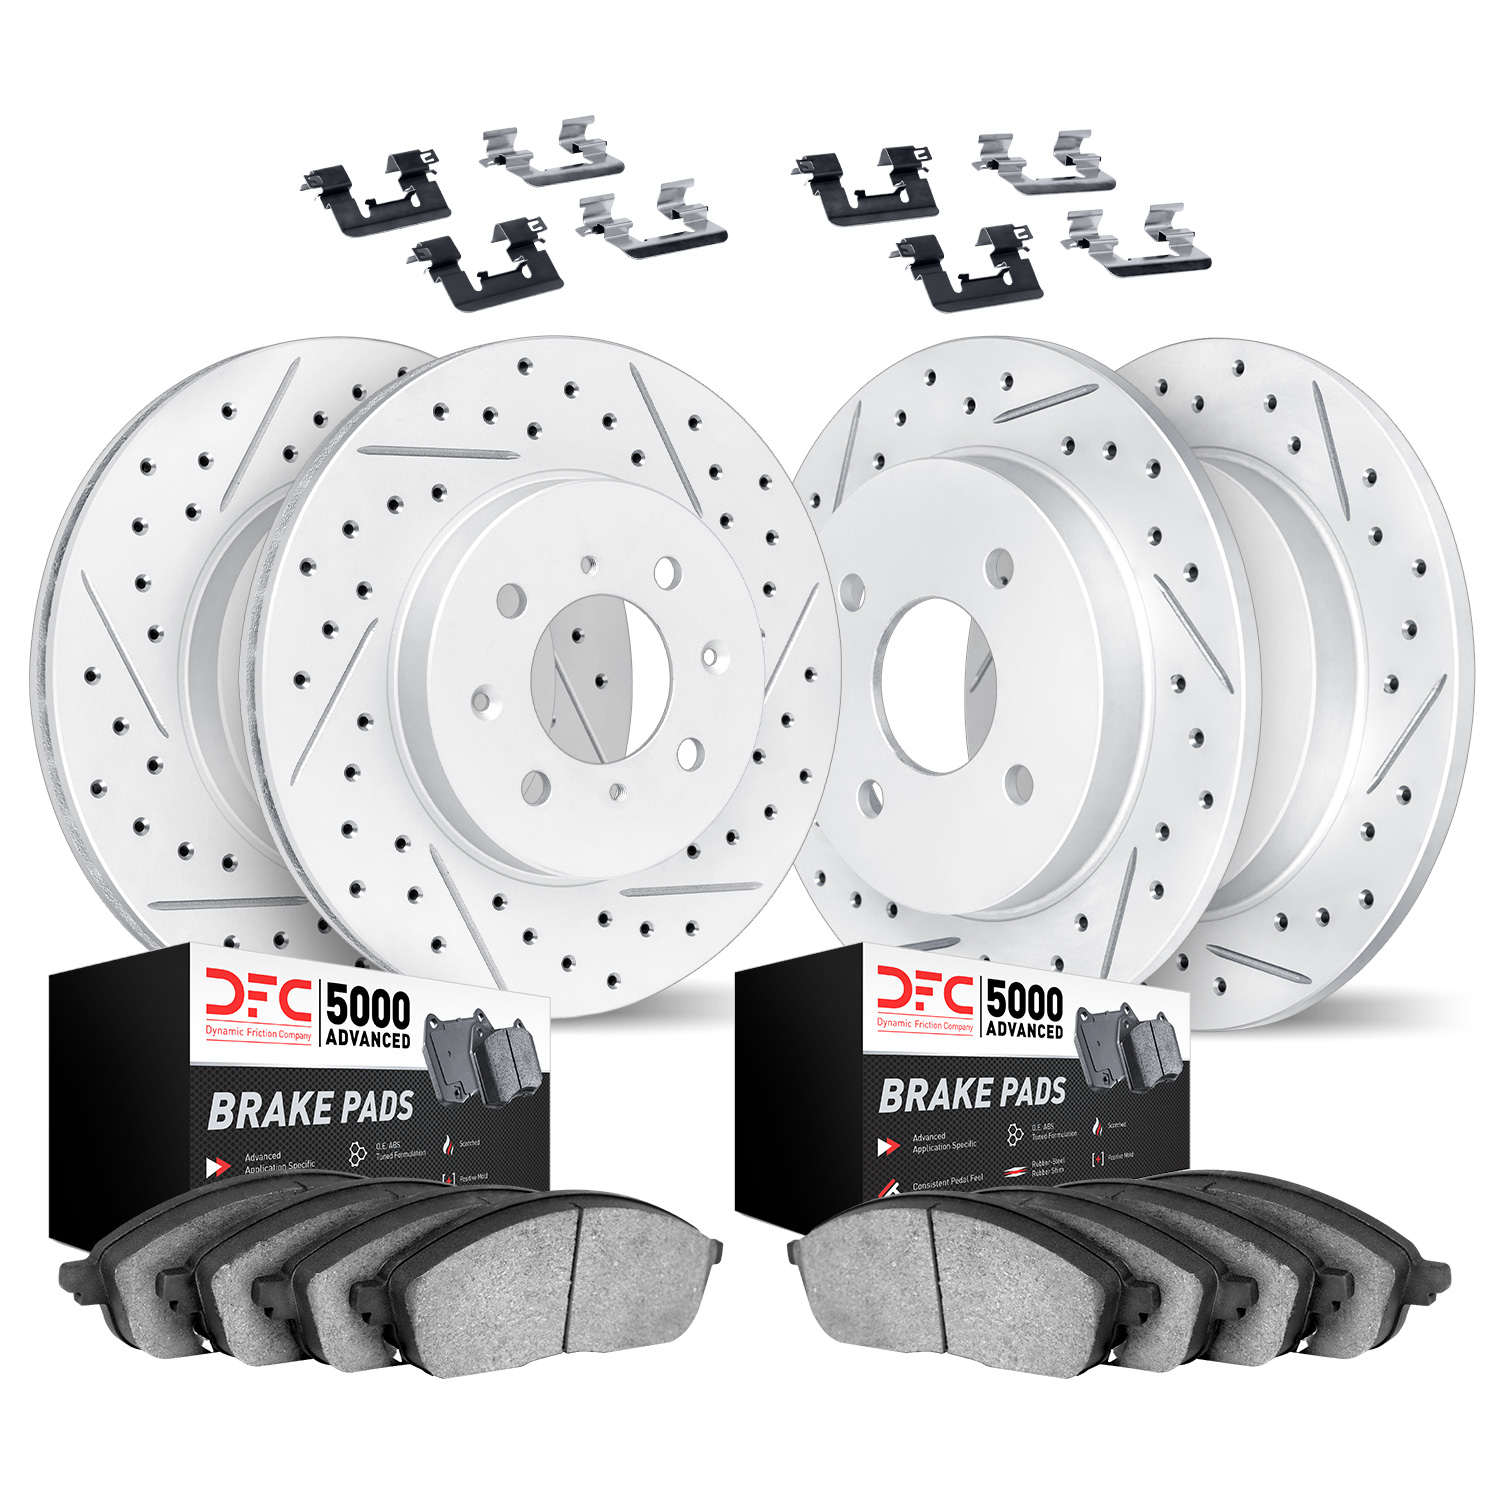 2514-54270 Geoperformance Drilled/Slotted Rotors w/5000 Advanced Brake Pads Kit & Hardware, Fits Select Ford/Lincoln/Mercury/Maz